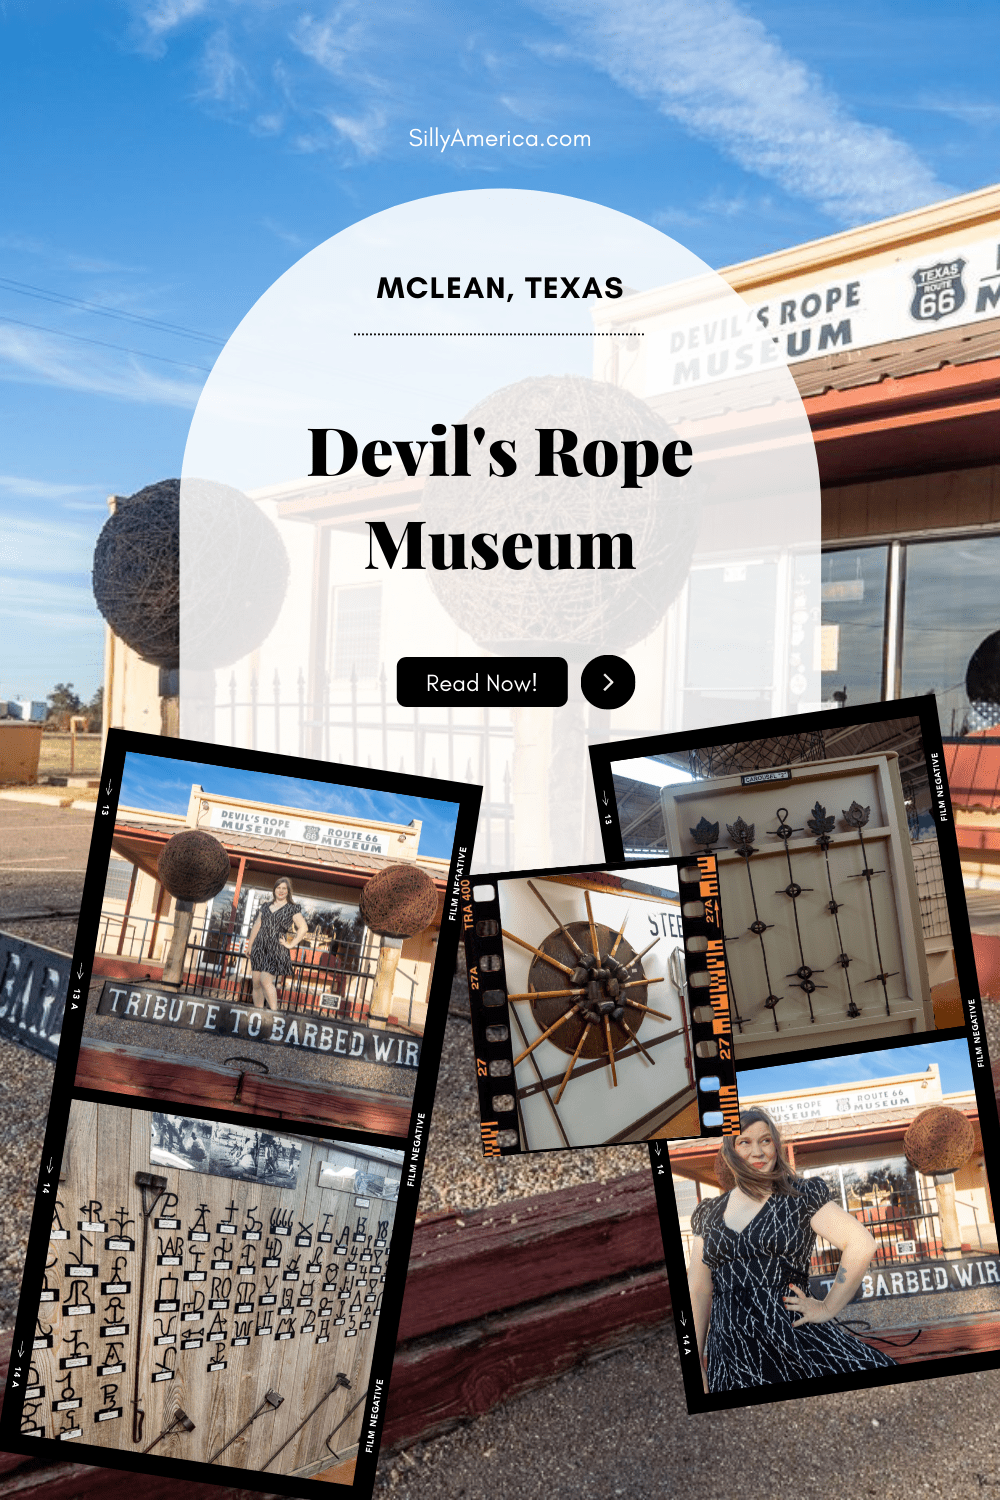 They say that good fences make good neighbors. And if that is the case the Devil's Rope Museum in McLean, Texas must have some pretty fantastic neighbors. This Route 66 attraction is dedicated to an unlikely and pretty sharp subject: barbed wire fencing. Add the barbed wire museum in Texas to your travel itinerary. #RoadTrips #RoadTripStop #Route66 #Route66RoadTrip #TexasRoute66 #Texas #TexasRoadTrip #TexasRoadsideAttractions #RoadsideAttractions #RoadsideAttraction #RoadsideAmerica #RoadTrip 